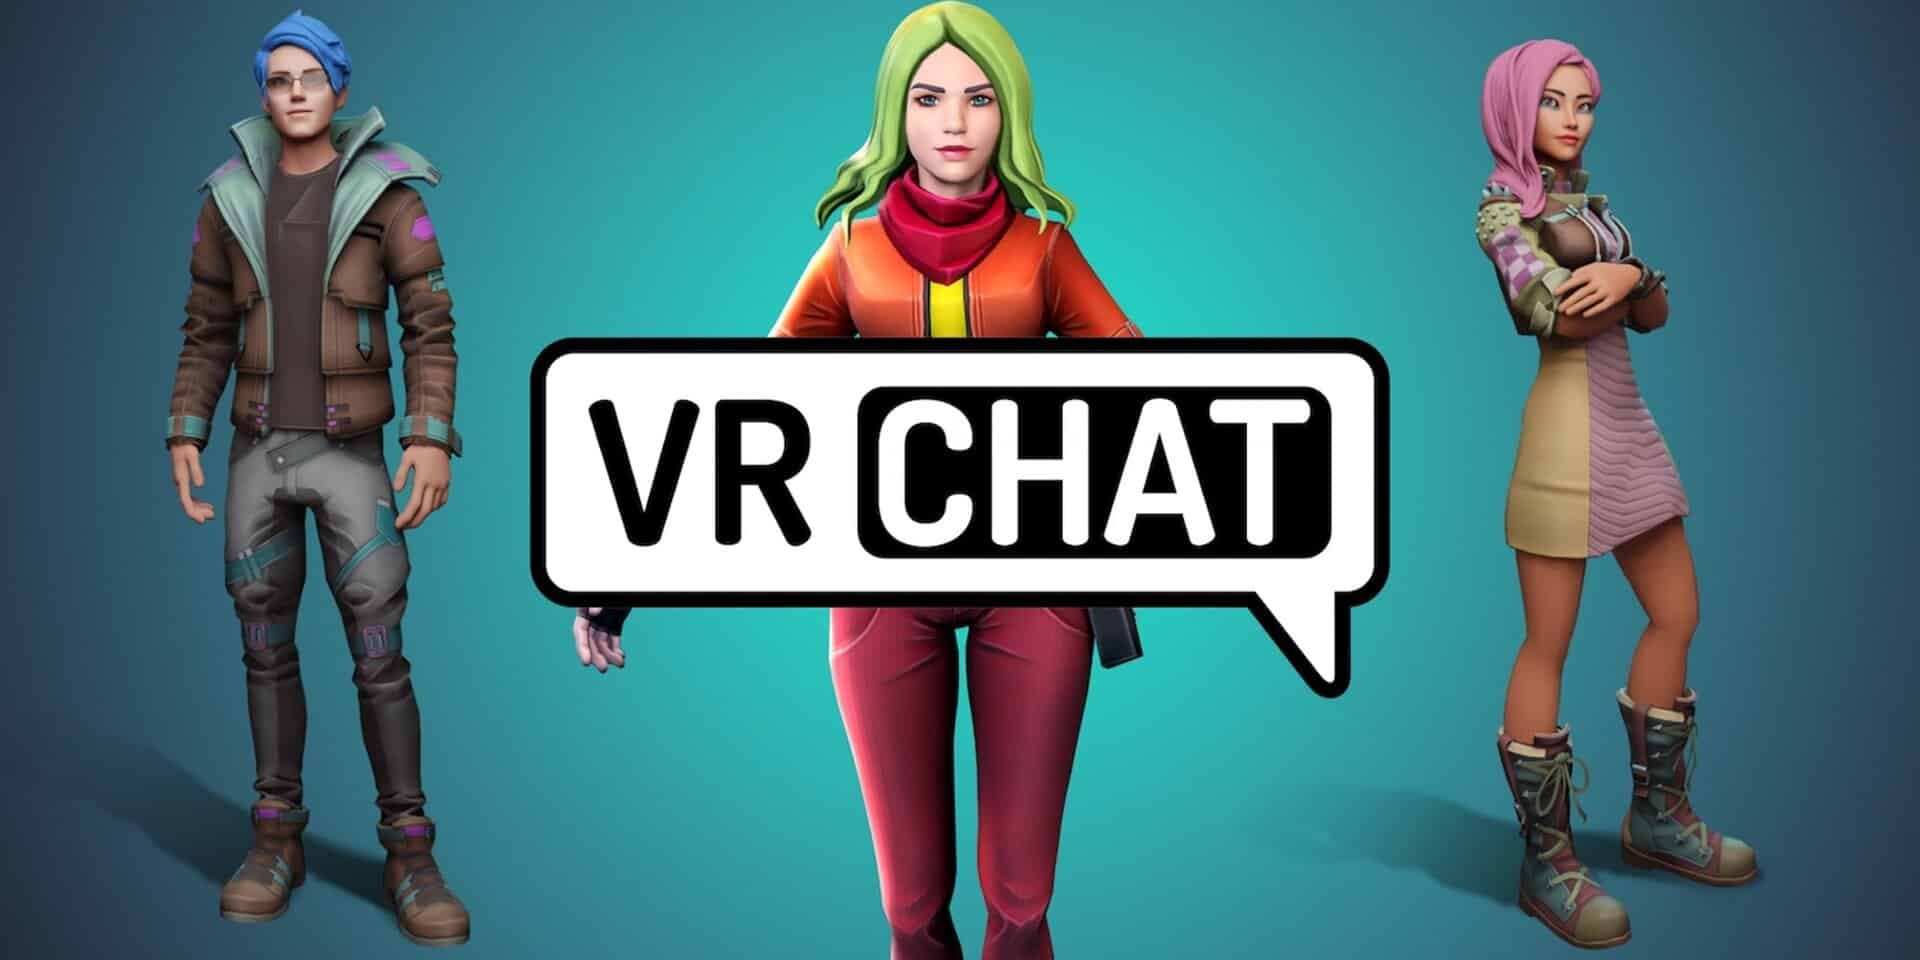 Make your vrchat avatar for pc vr or quest by Metamoqvr  Fiverr